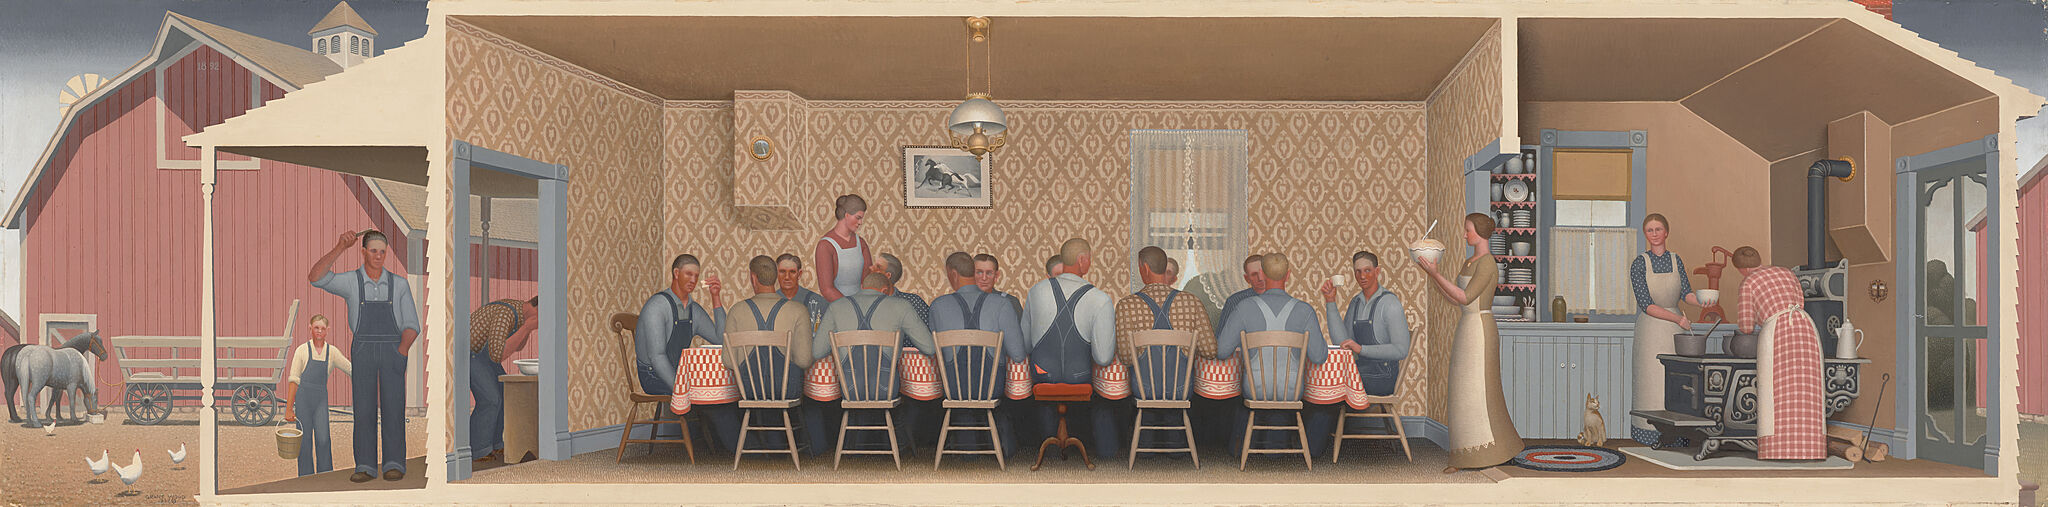 Painting of threshers dining and wives serving them.